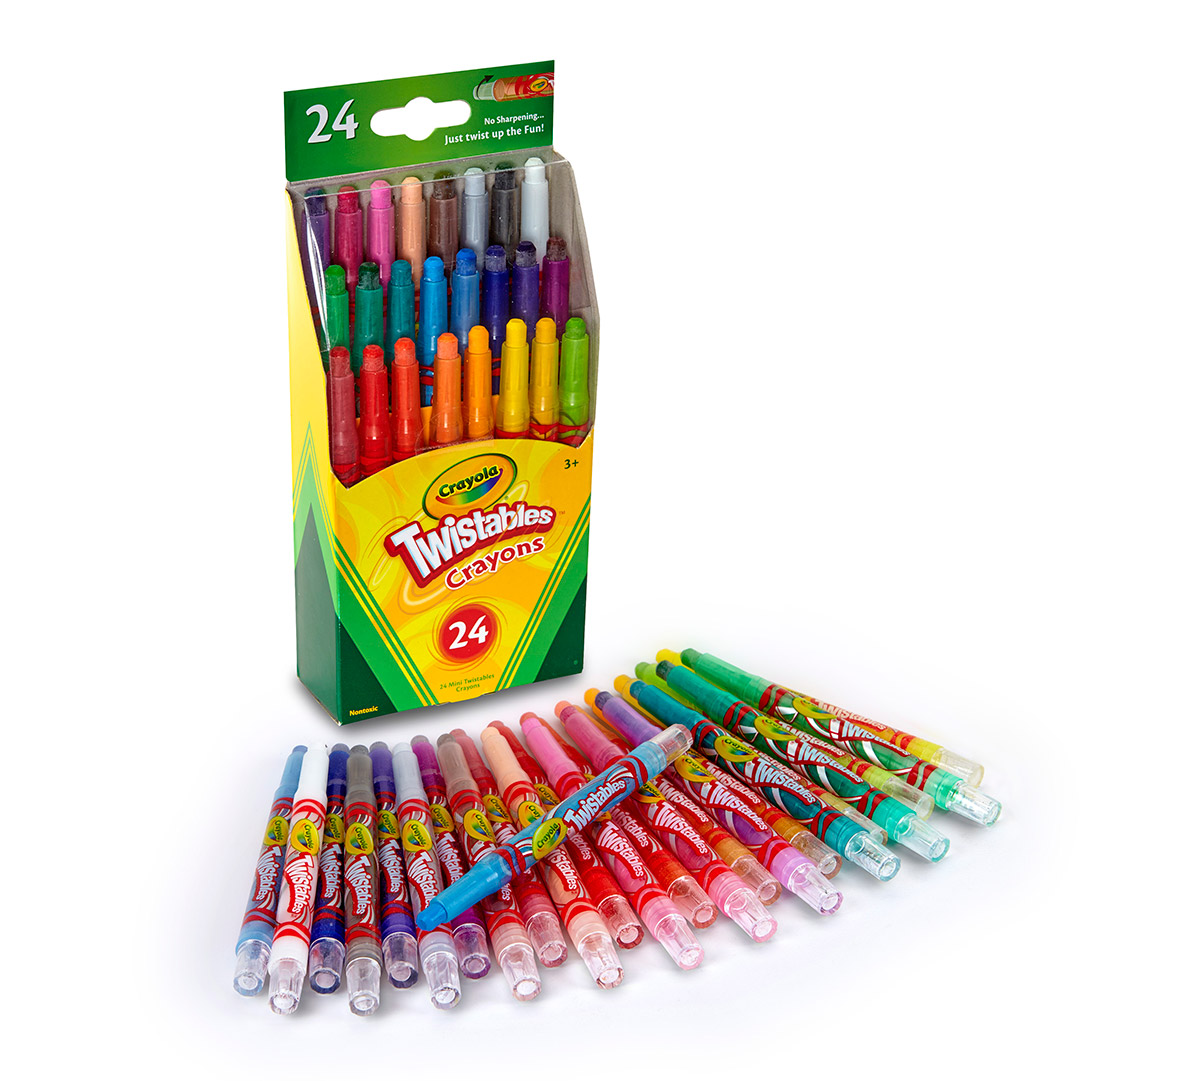 Crayola Mini Twistables Crayons, Neon Colors Included, 24ct, Gift for